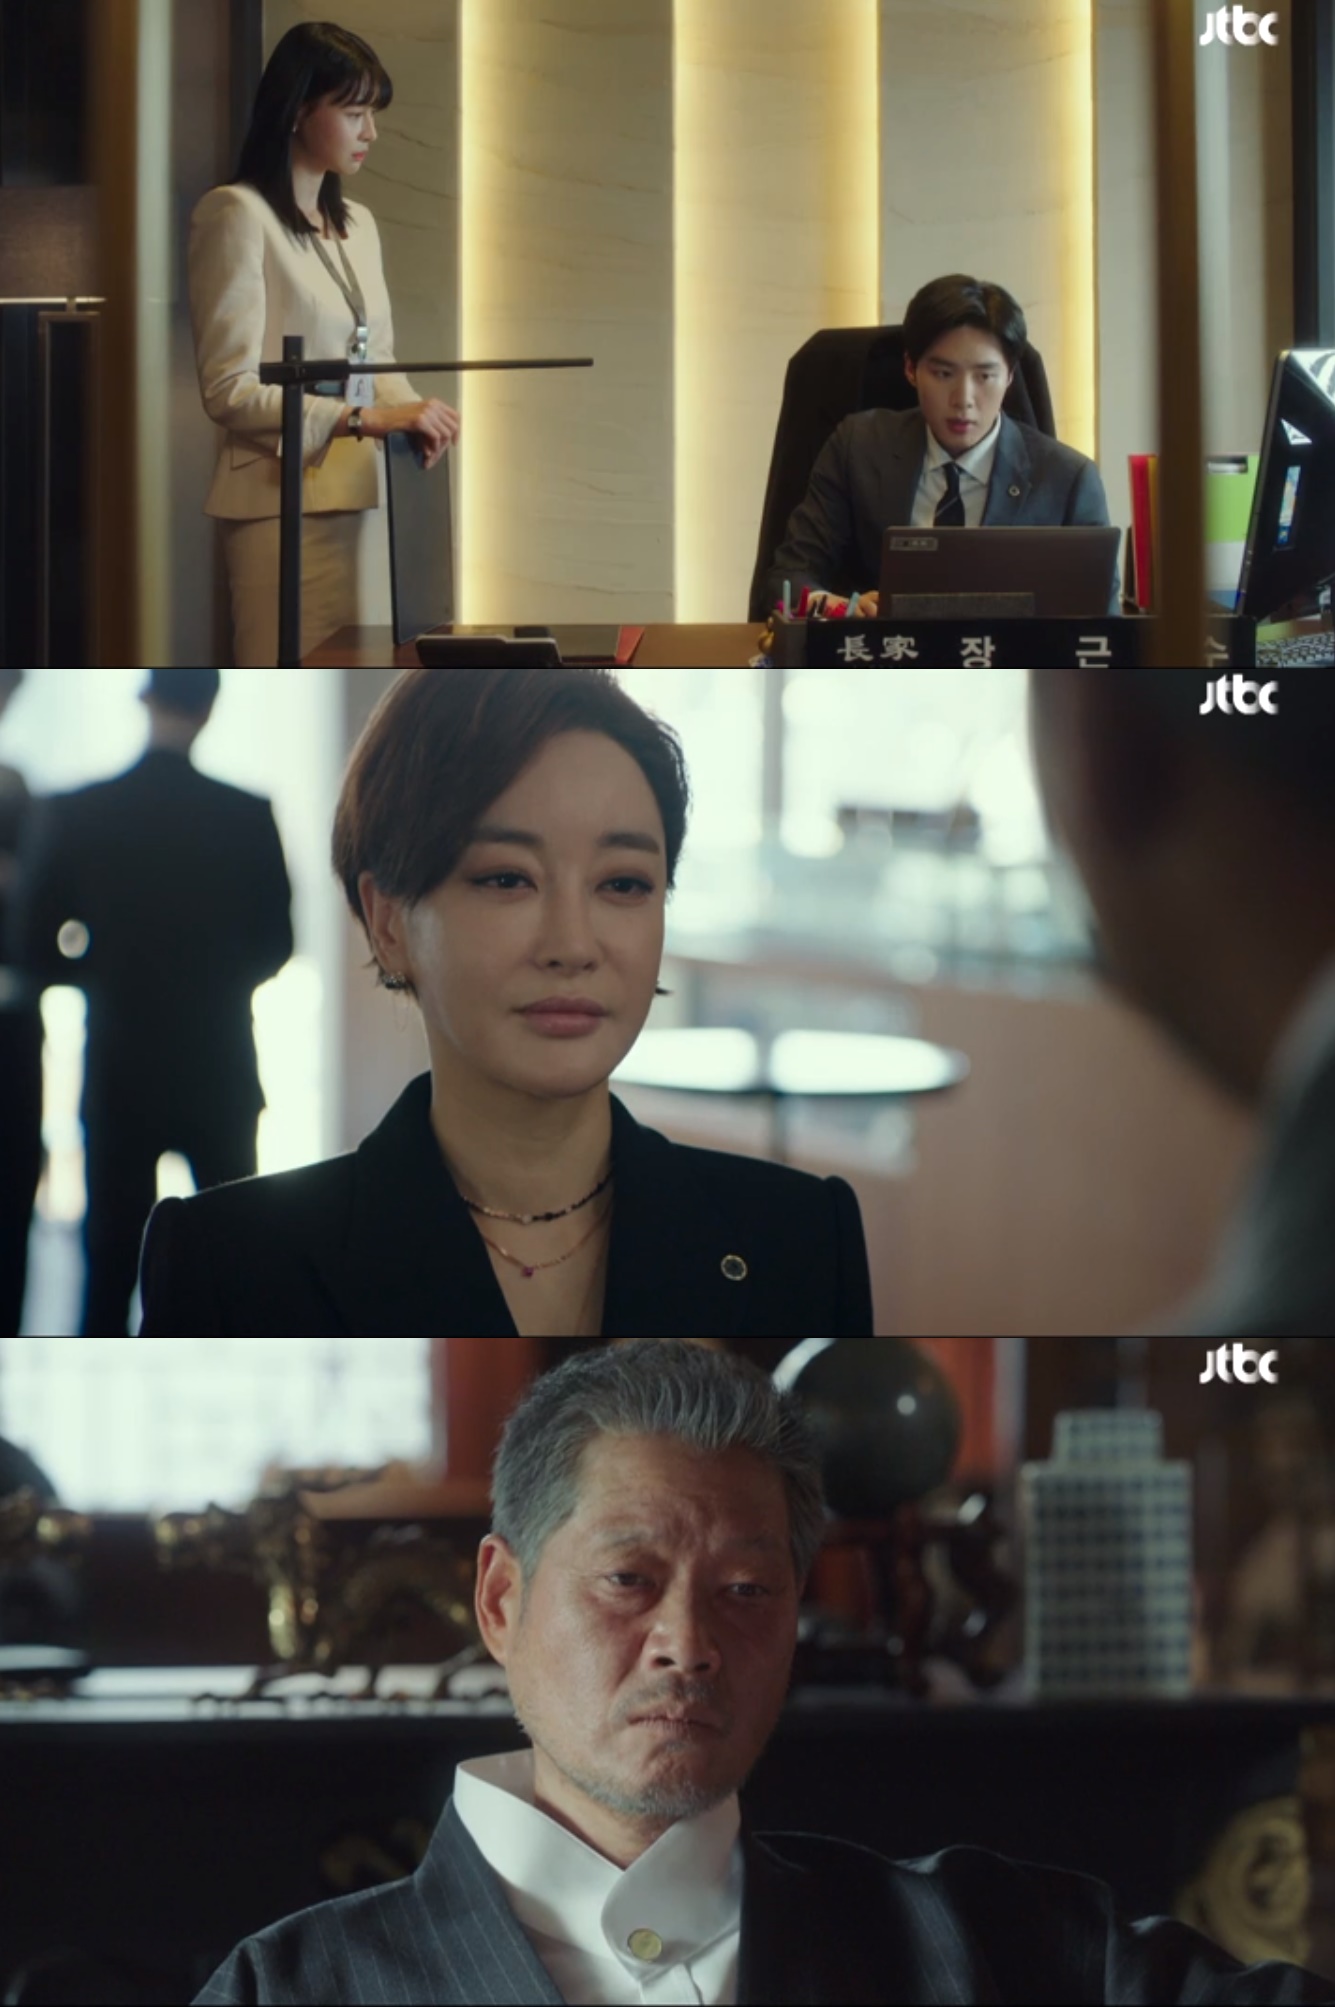 As Itaewon Clath reaches the end with a chewy development, the interest of viewers is surging.In JTBCs Golden Earth Drama Itaewon Klath (the original version of the play, Gwangjin and director Kim Sung-yoon and the same name Web toon), which aired on the 14th night, Park Seo-joon was depicted as being hit by a car and falling into crisis.On this day, Roy and Joe Lee worked hard to expand their business, and at the same time they met with shareholders to work on the undercover.She loved him, too. Joe continued to show his affection for him, but he still turned away from his courtship with a firmness.Park met Oh Soo-ah (Kwon Nara), and Oh Soo-ah captured a different feeling from before.He ordered the Parksae Roy to tell me you love me, but he didnt get an answer.Meanwhile, the shareholders meeting was a bustle due to Jang Geun-soos interruption. Joe-yool Lee was disappointed with the results and tried to find shareholders, but Park dissuaded him.Then Roy bought a necklace that Joe-yool Lee had said was pretty and put it in a drawer.He realized his heartfelt commitment to Joe-yool Lee and ran to him.At this point, Jean Bo-hyeun kidnapped Joe-yool Lee, and Roy, who learned of it, hurriedly followed.The Fountainhead eventually hit Roy with his car, who lost consciousness and bled from his head.There was no trailer after the meaningful 15th ending. The audiences curiosity increased, and the top of the real-time search term of the main portal site came up with Itaewon Clath 15 episode notice.Since then, people have begun to pay attention to Itaewon Clath Web toon ending.The ost, which had flowed from the end of Park Seo-joons necklace and the end of the Seo-yool Lee, was also of interest.As such, the Itaewon Clath craze is rarely cooled.In the topical JiSoo (March 2 to March 8), which was announced by Good Data Corporation, a TV topic analysis agency, it continued to dominate the solo for the third consecutive week with a 37.65% share in the overall drama category including terrestrial, general and cable.Drama cast member topic JiSoo Park Seo-joon was ranked first, Kim Dae-mi was second, and Kwon Nara was ranked fifth.iMBC  Photo JTBC Offering and Capture